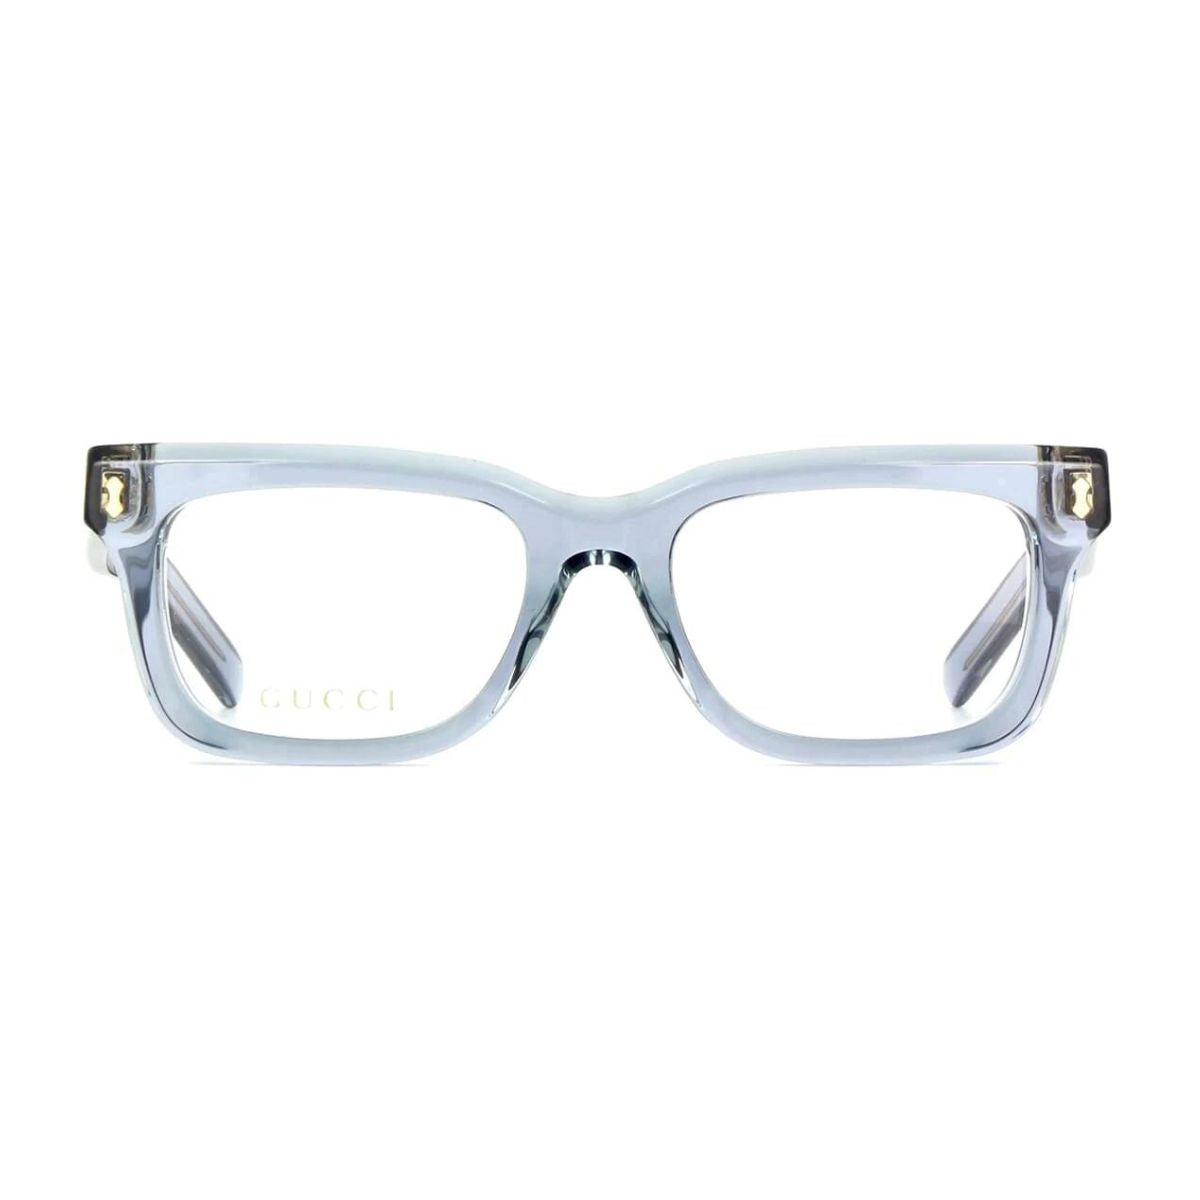 "Gucci GG1522O 008 optical frame for women's online at optorium"